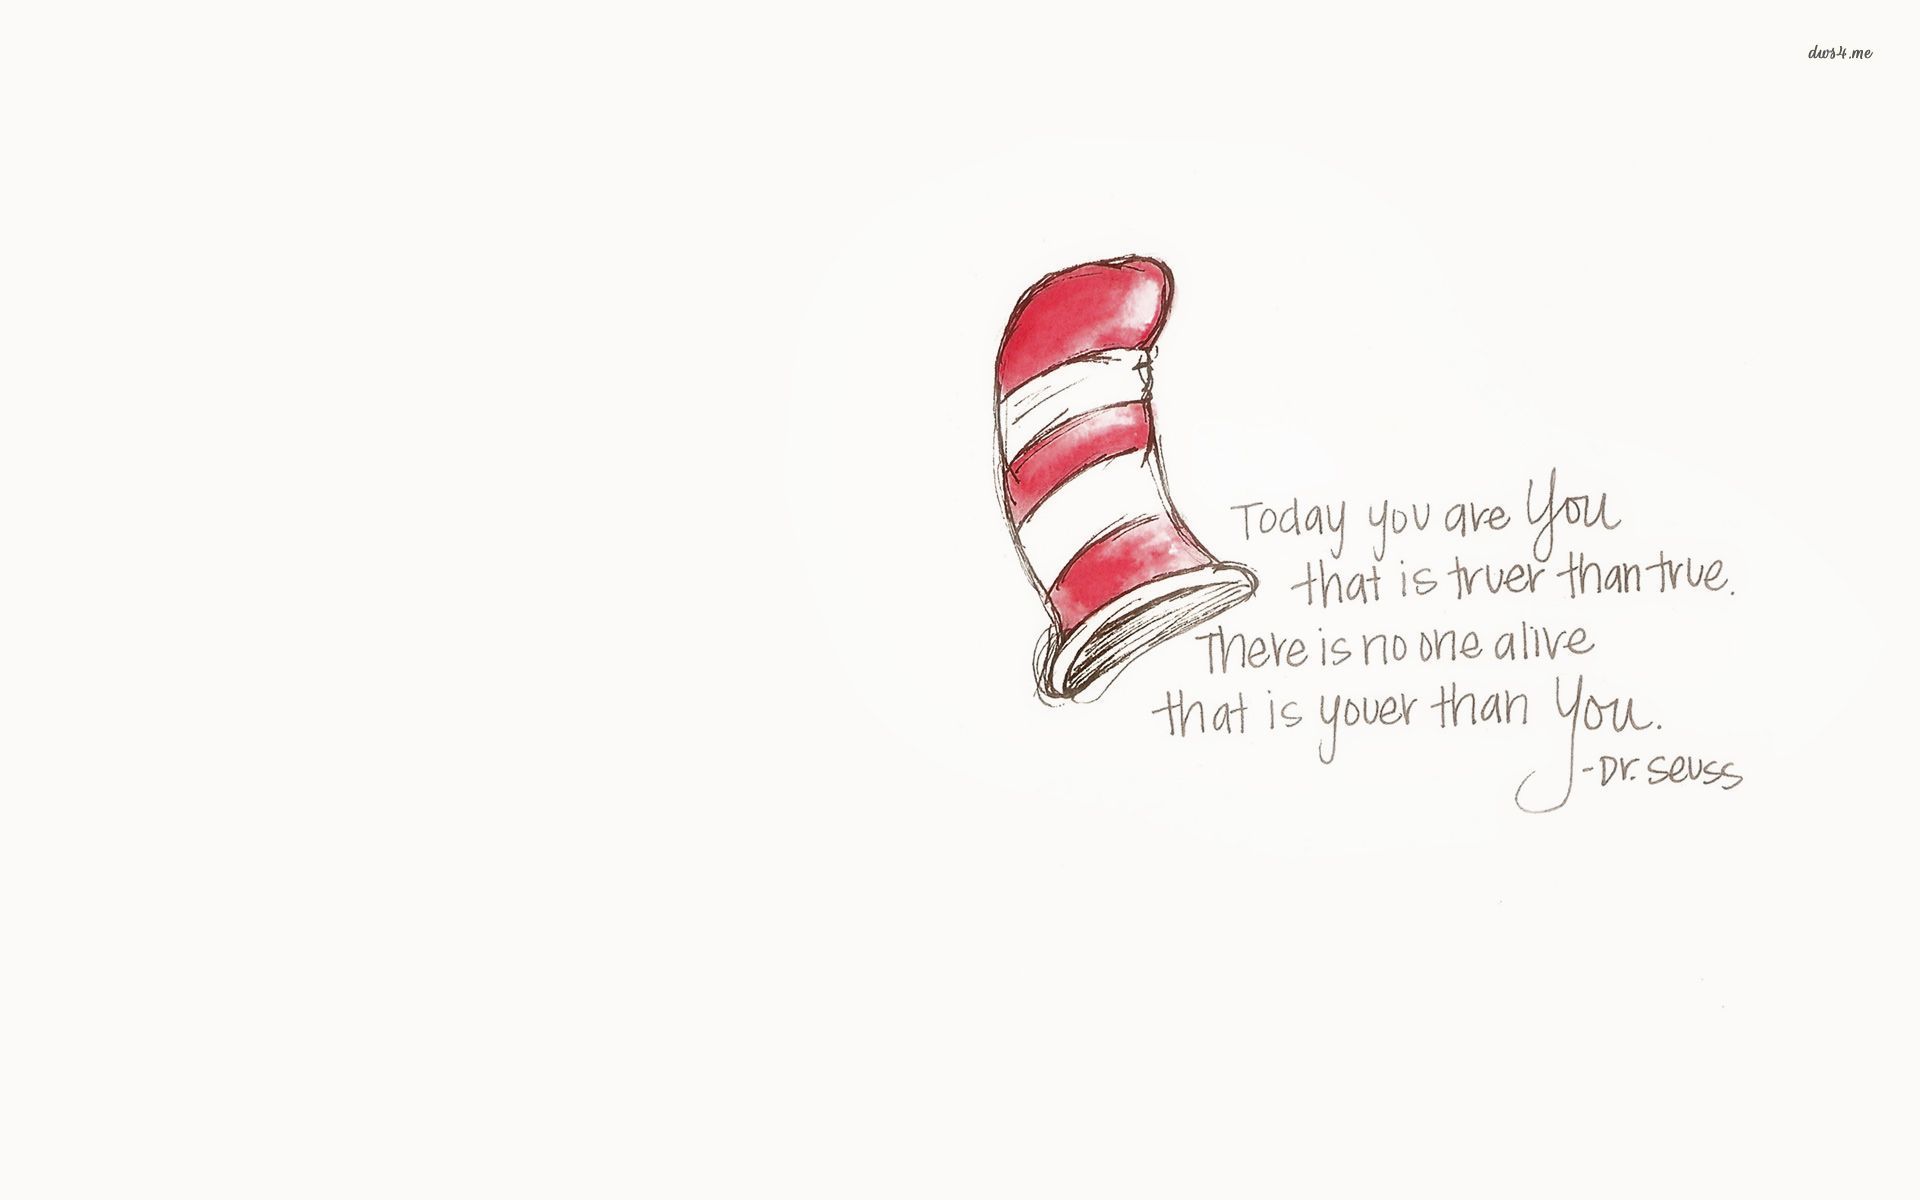 Dr Seuss quote wallpaper   Quote wallpapers   22741 1920x1200